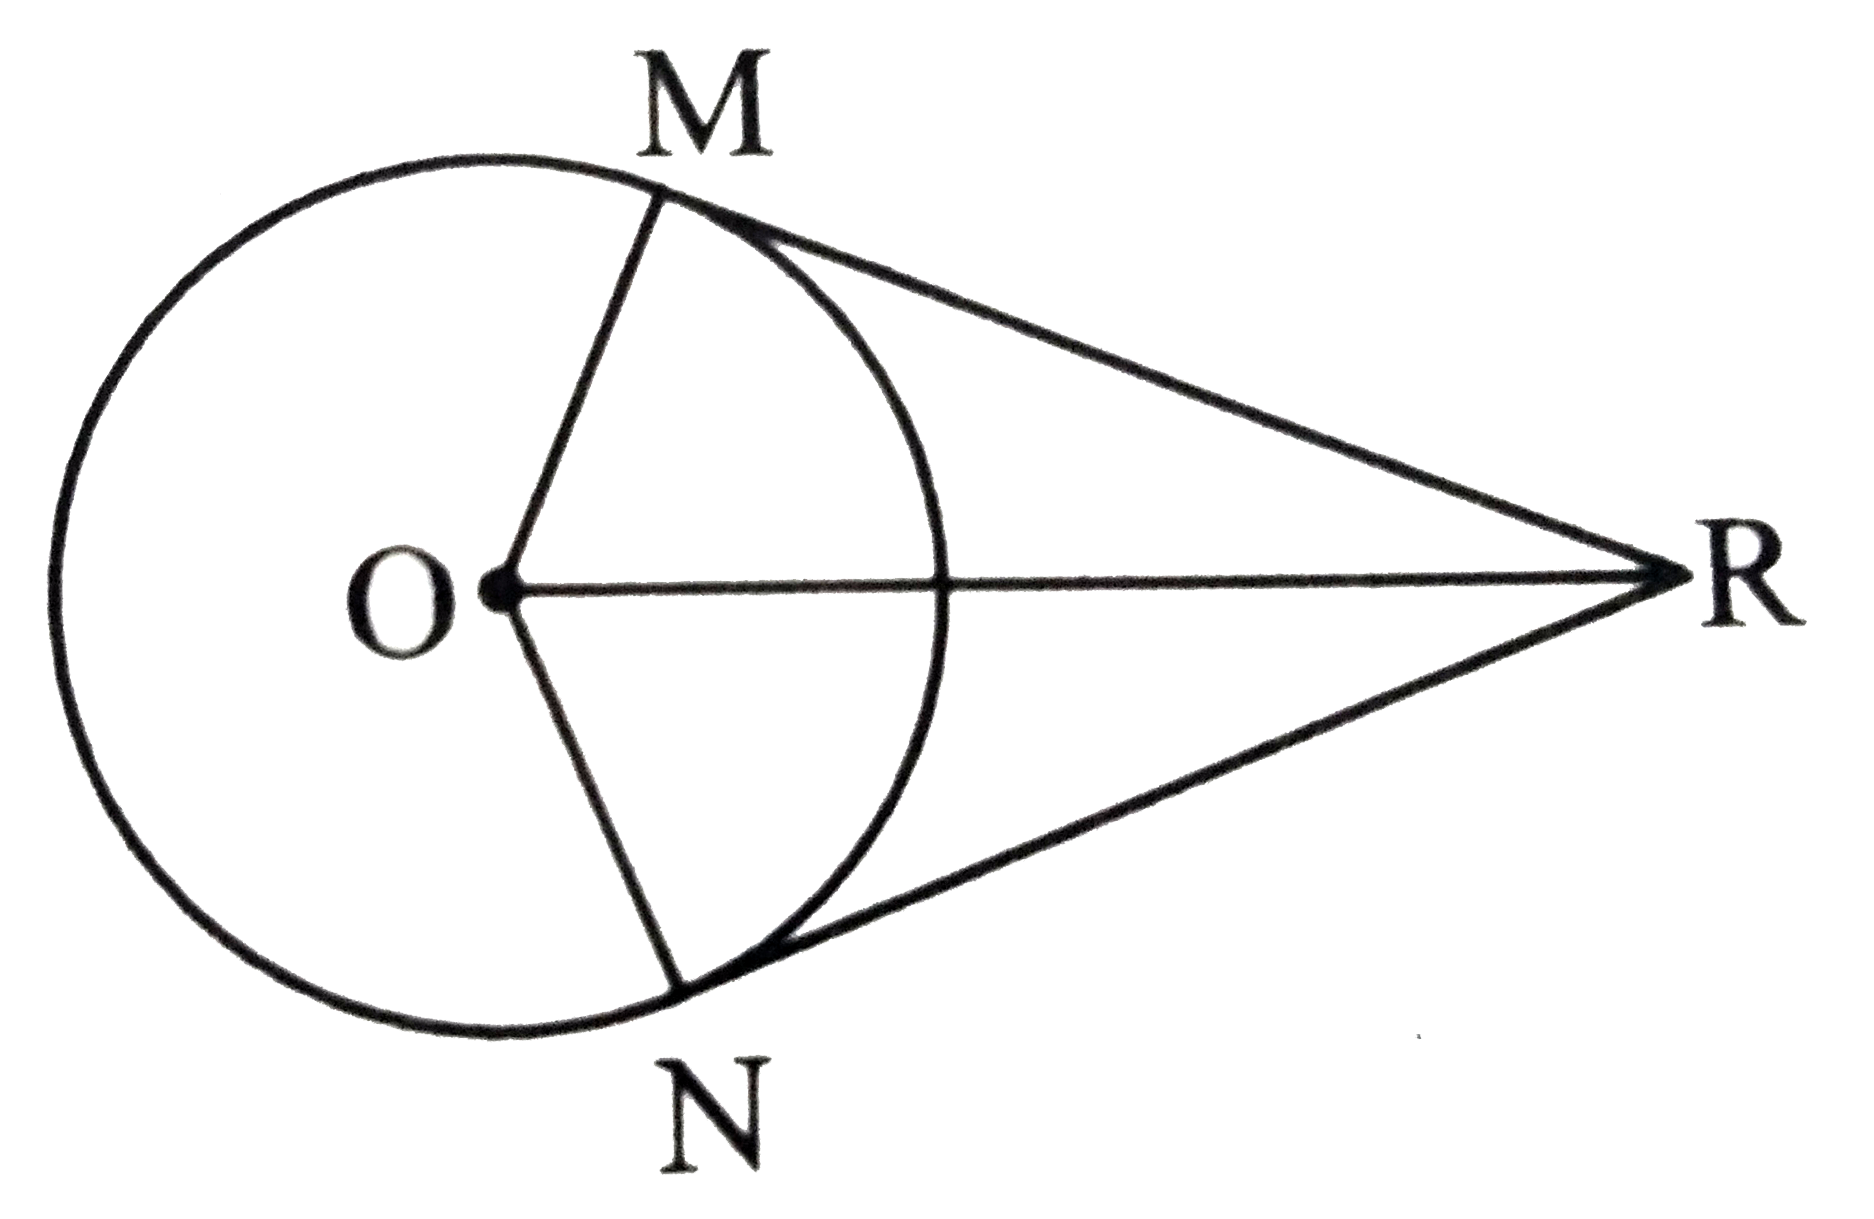 Seg RM and seg RN are tangents segments of a circle with centre O. Prove that seg OR bisects angle MRN as well as angle MON .